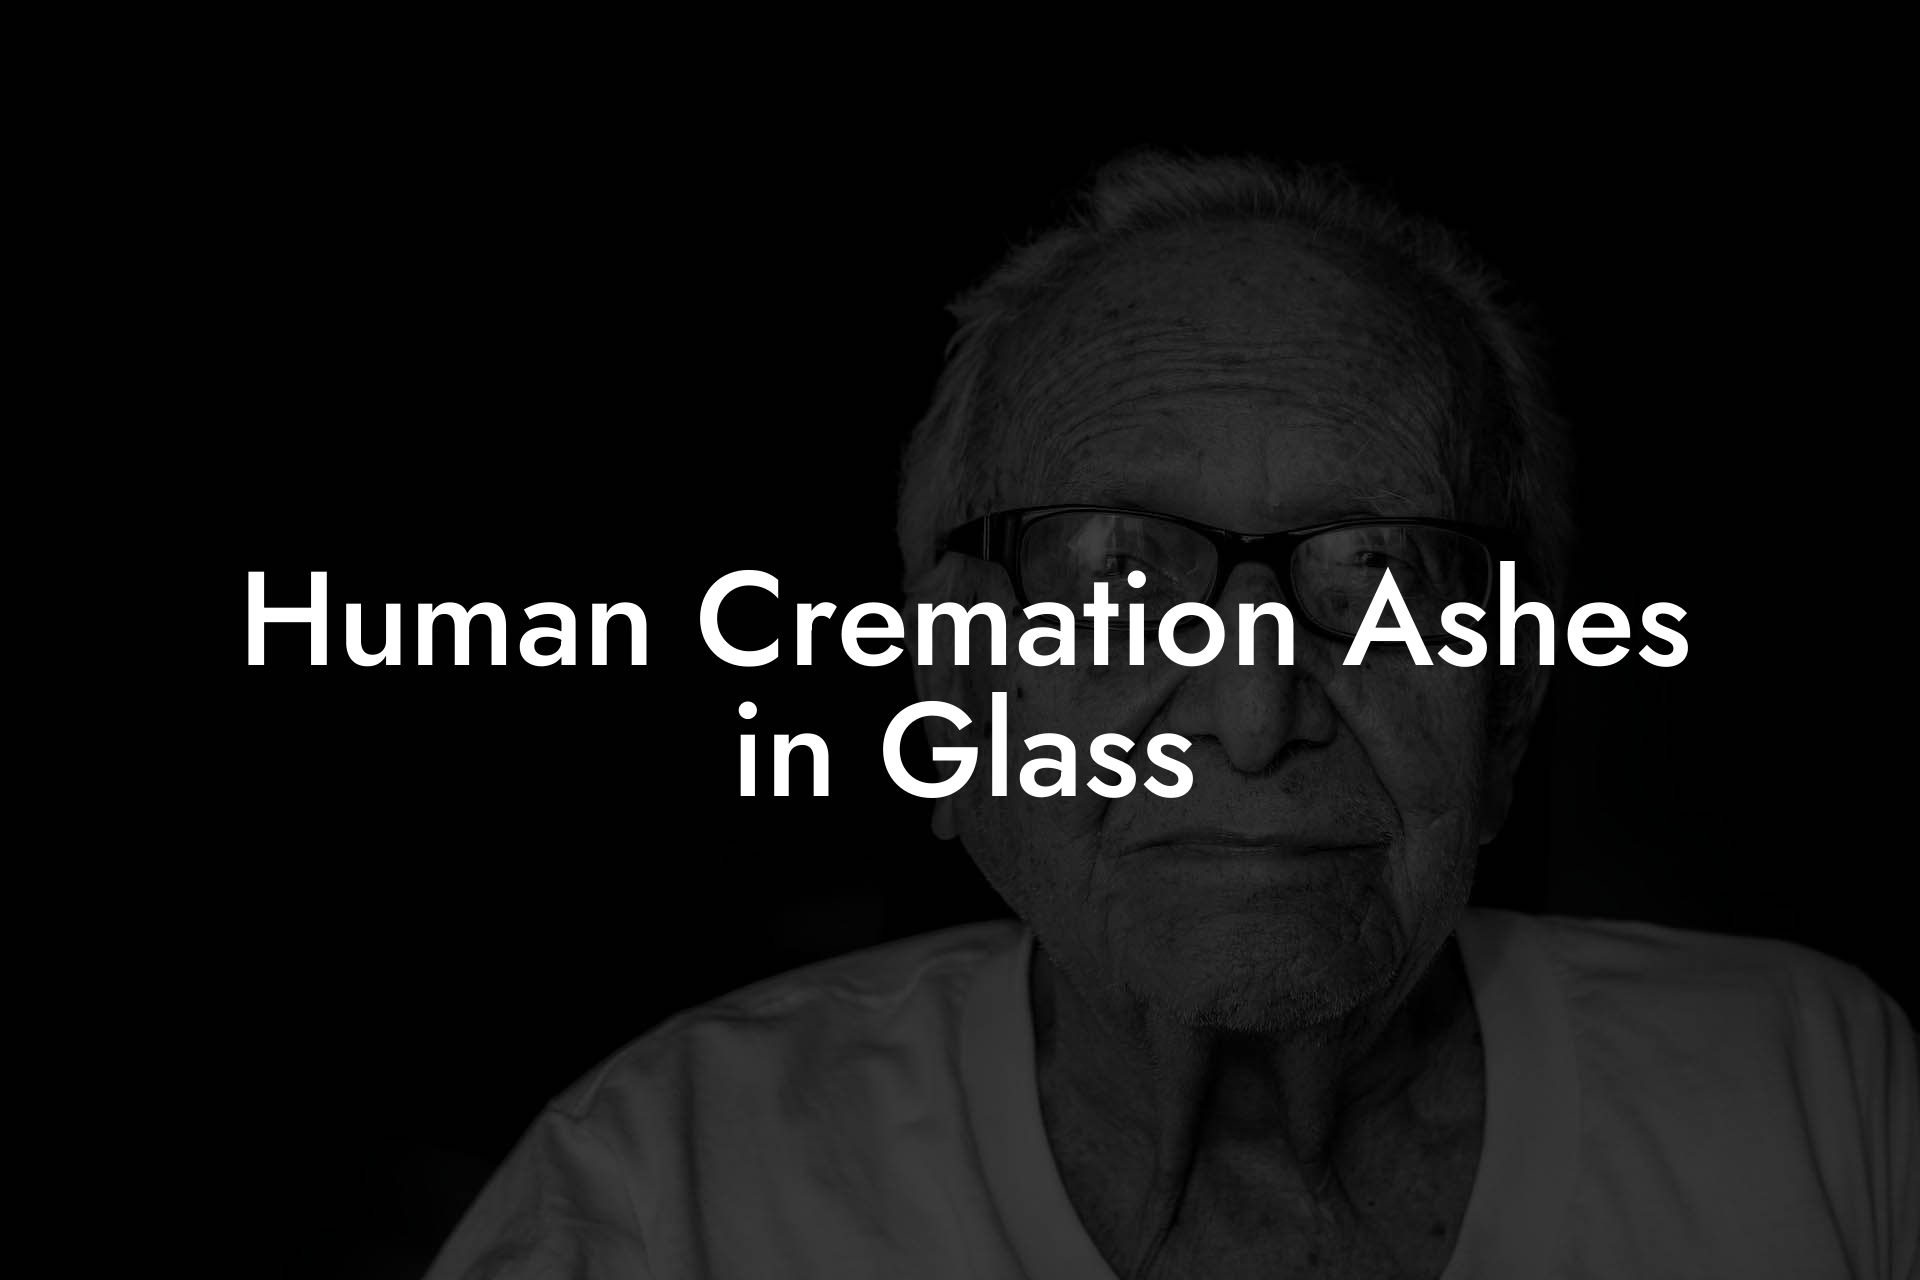 Human Cremation Ashes in Glass